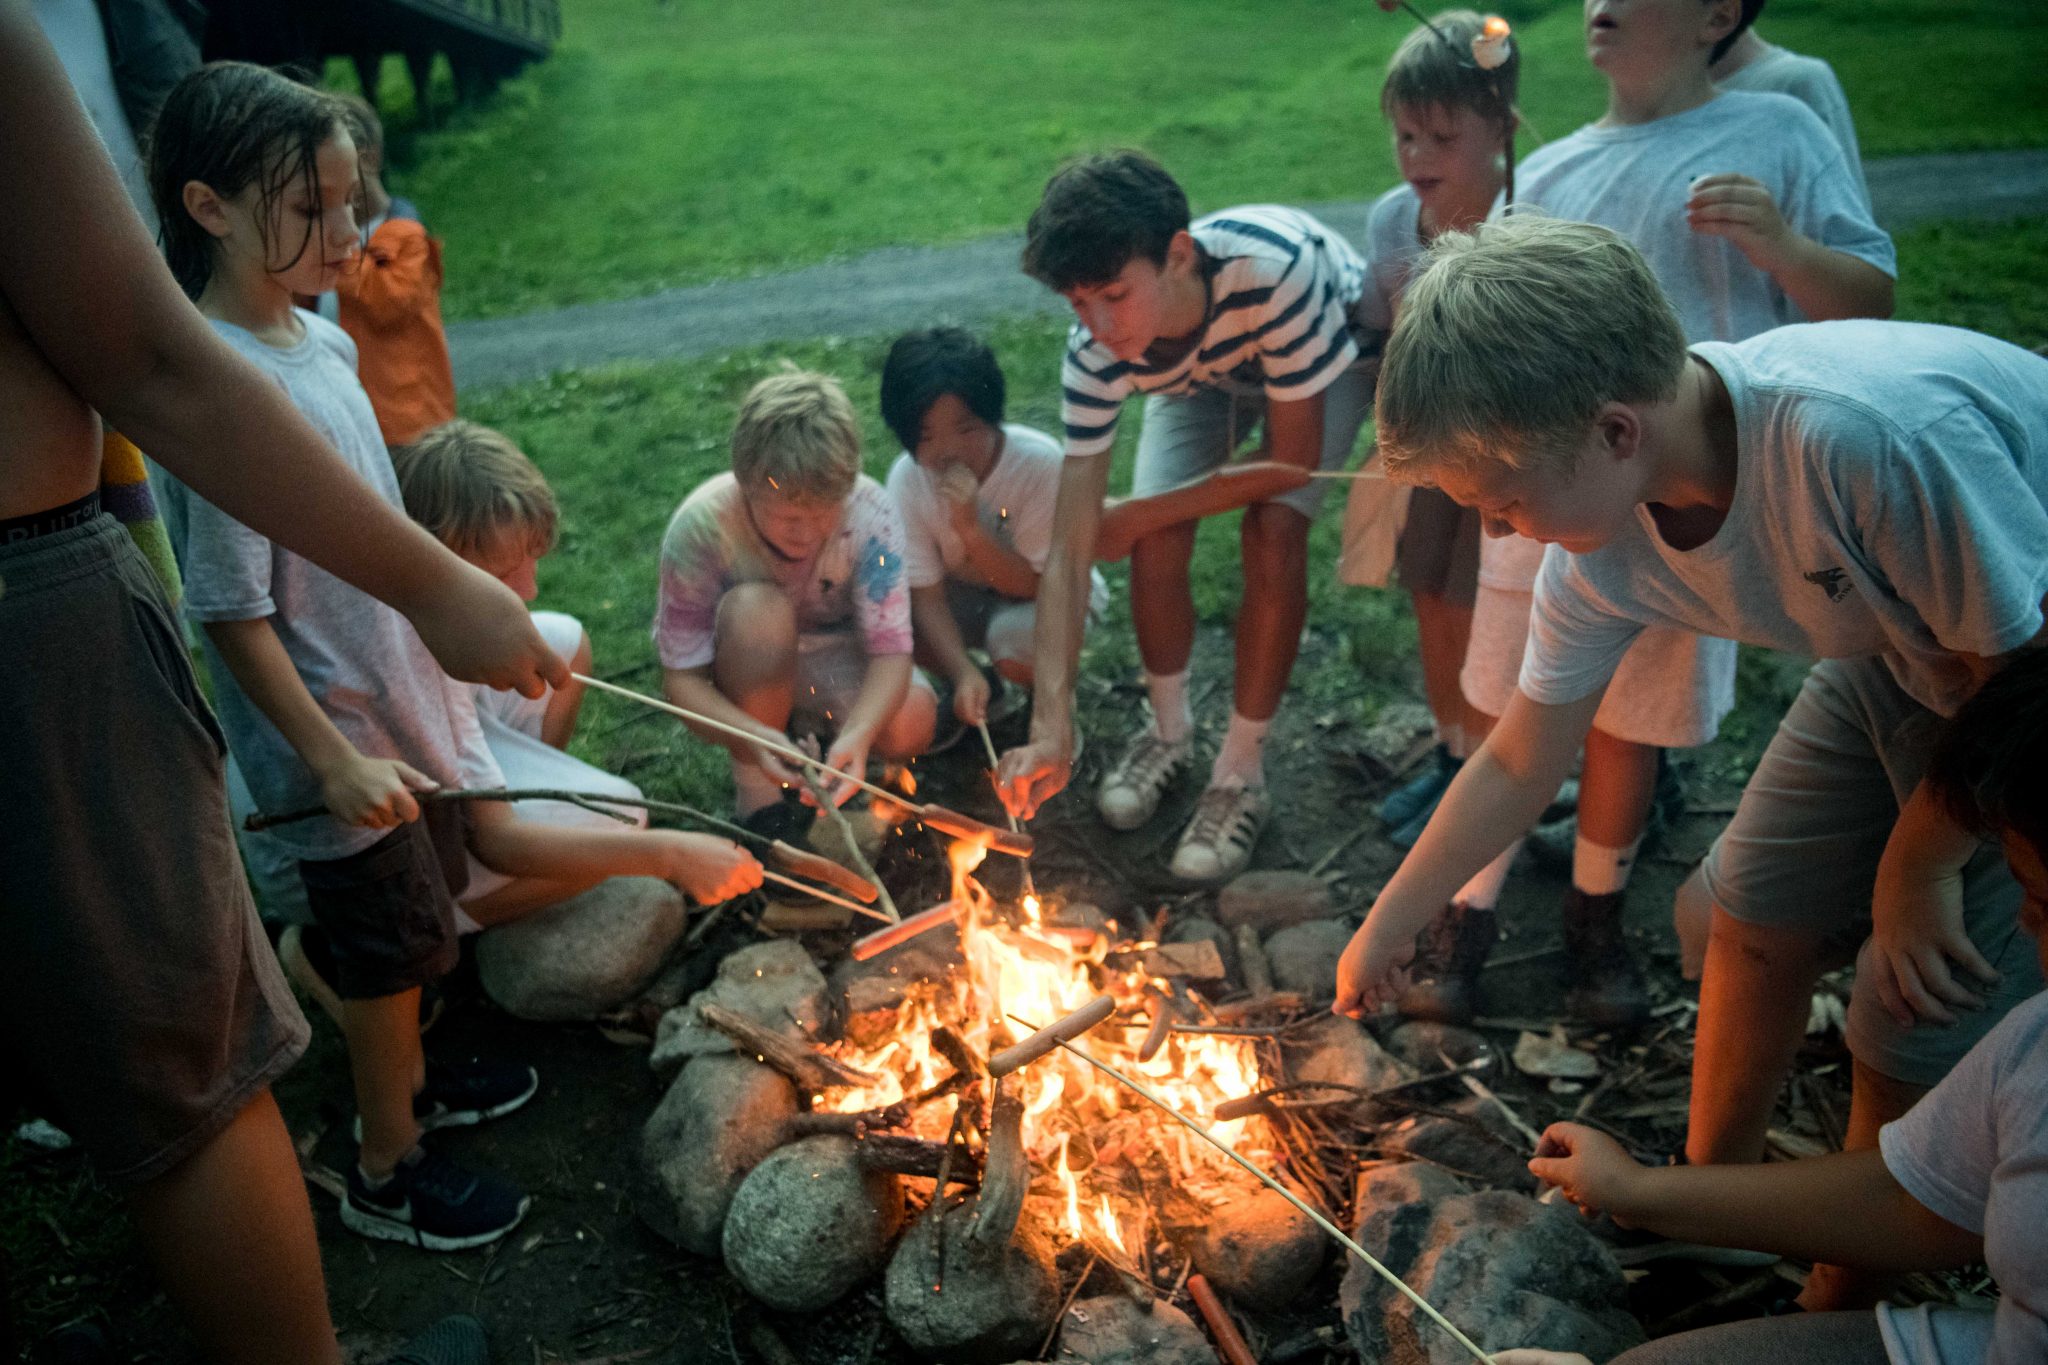 A group of Lanakila campers roasting hotdogs over a fire.